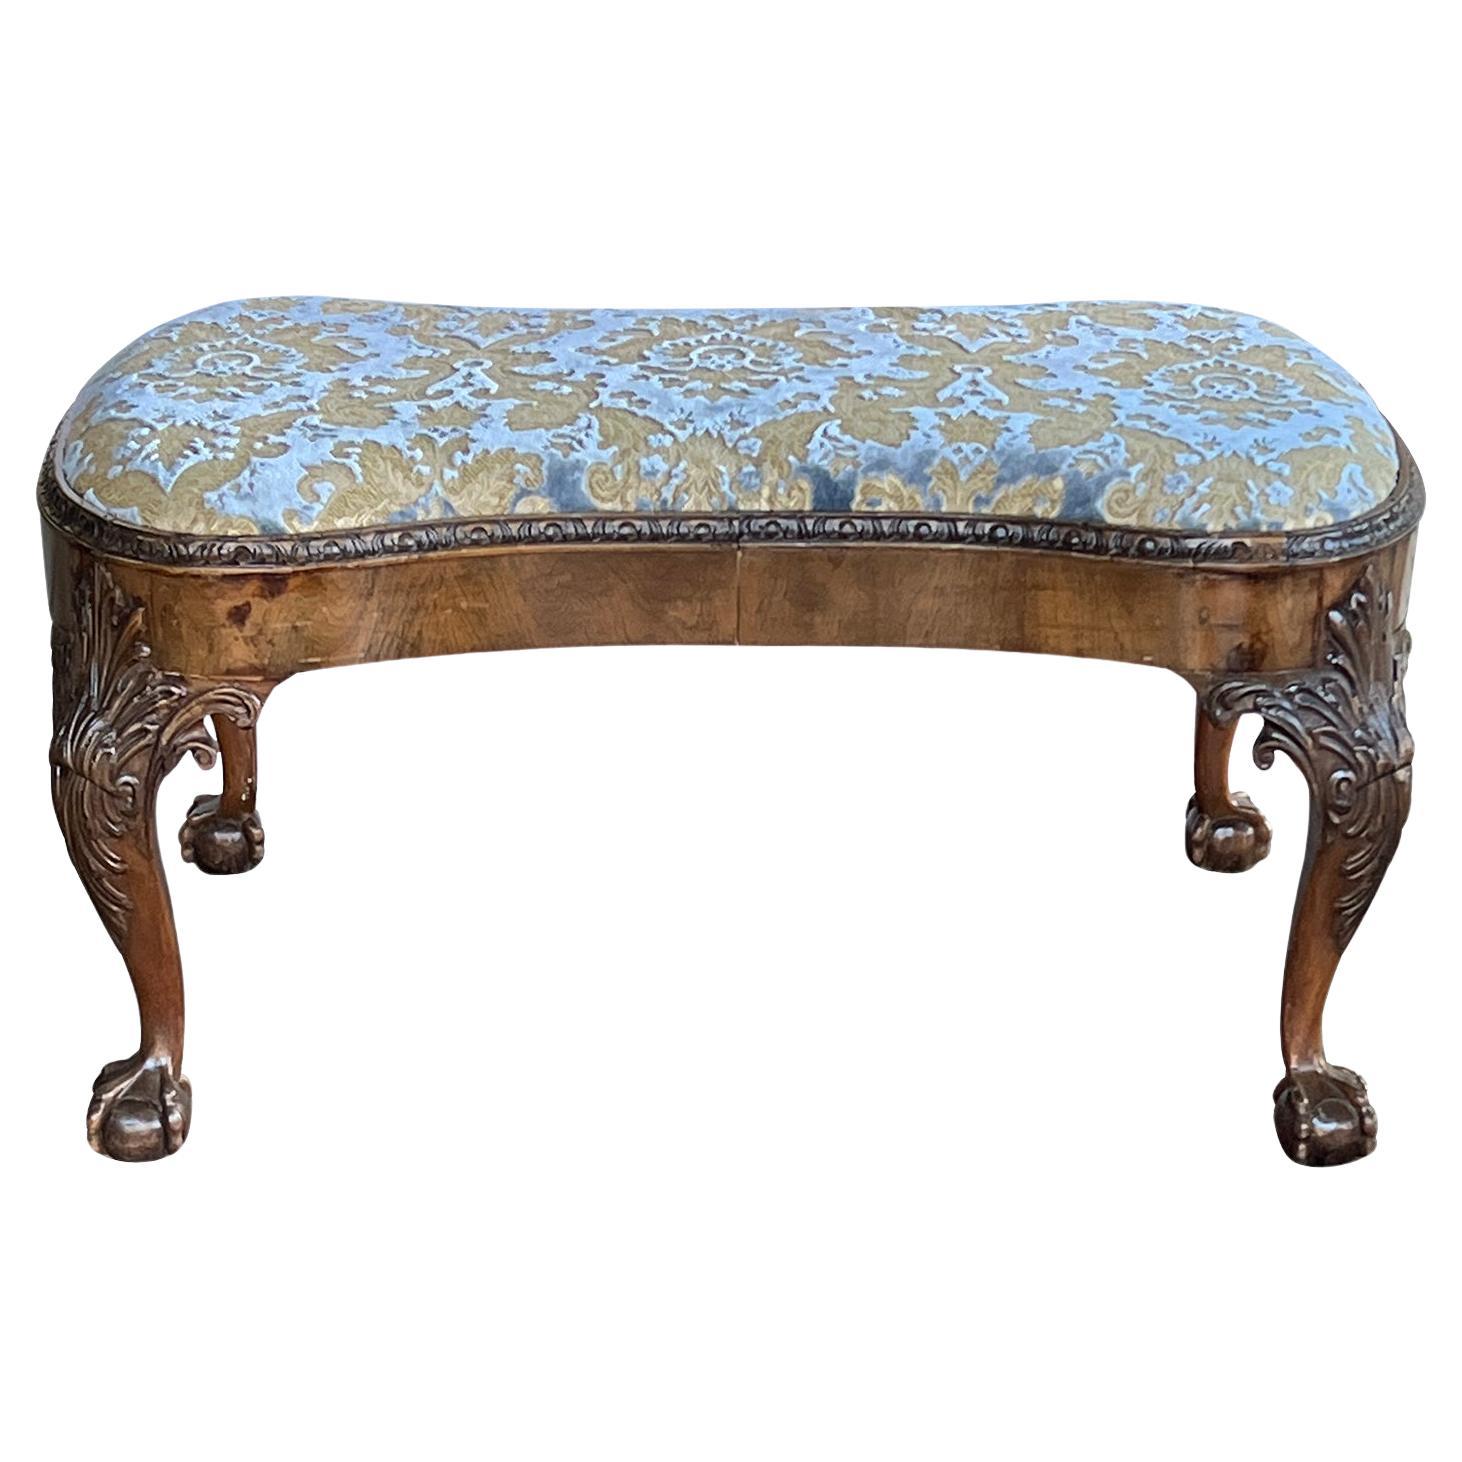 A Large English George II Walnut Bench with Carved Legs